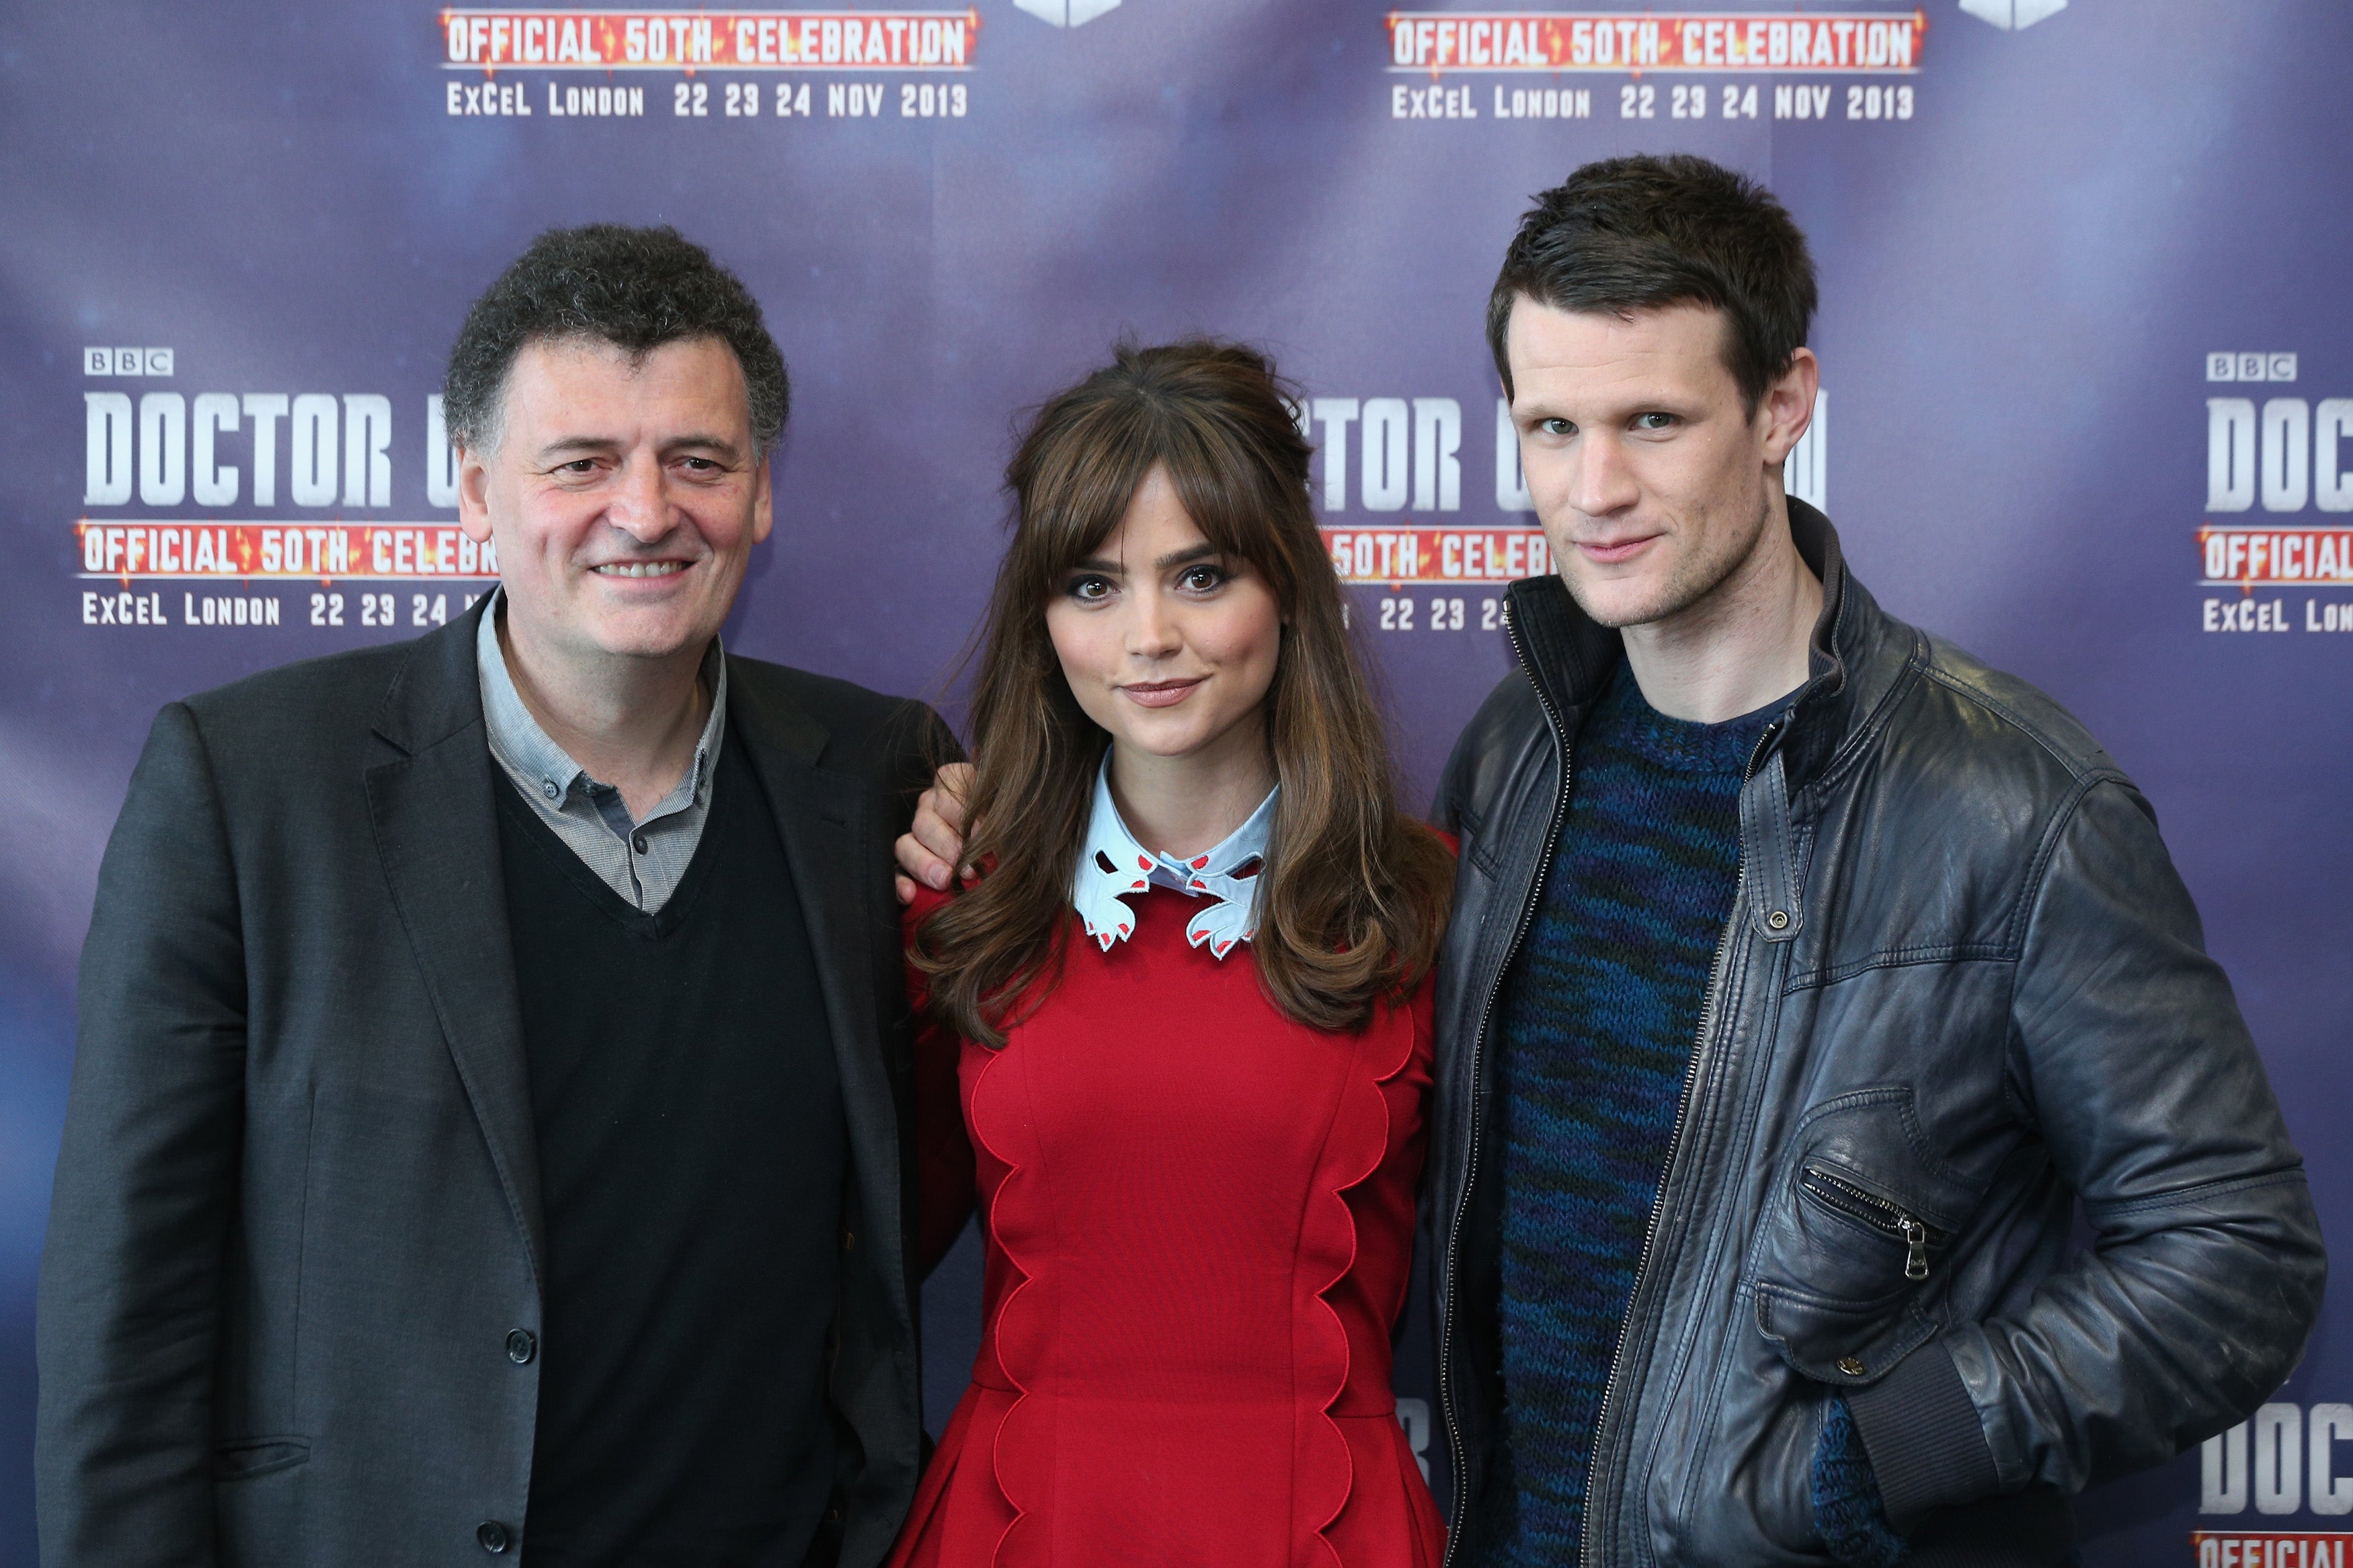 Moffat pictured with ‘Doctor Who’ actors Jenna Coleman, who played ‘Clara Oswald’ and former Doctor Matt Smith, in 2013